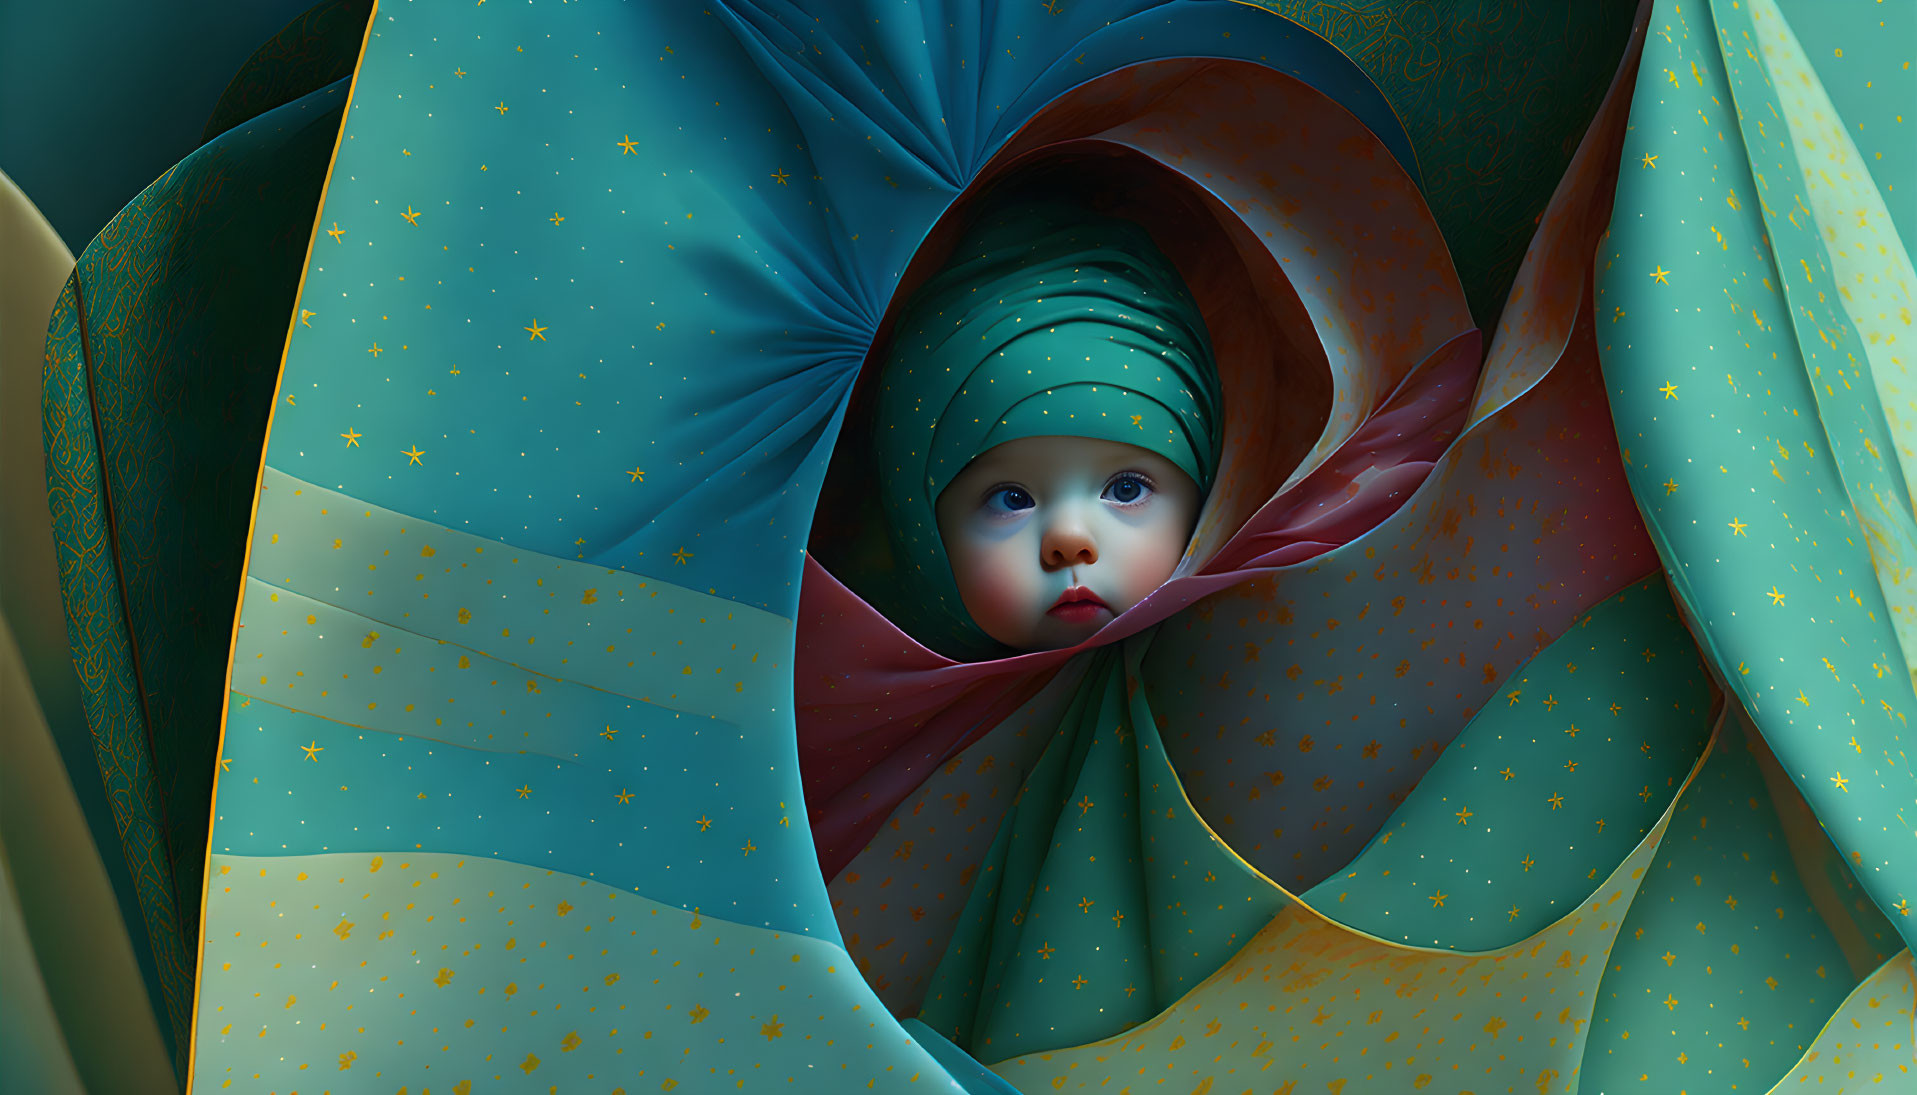 Baby peeking through teal and orange spiral fabric with golden stars